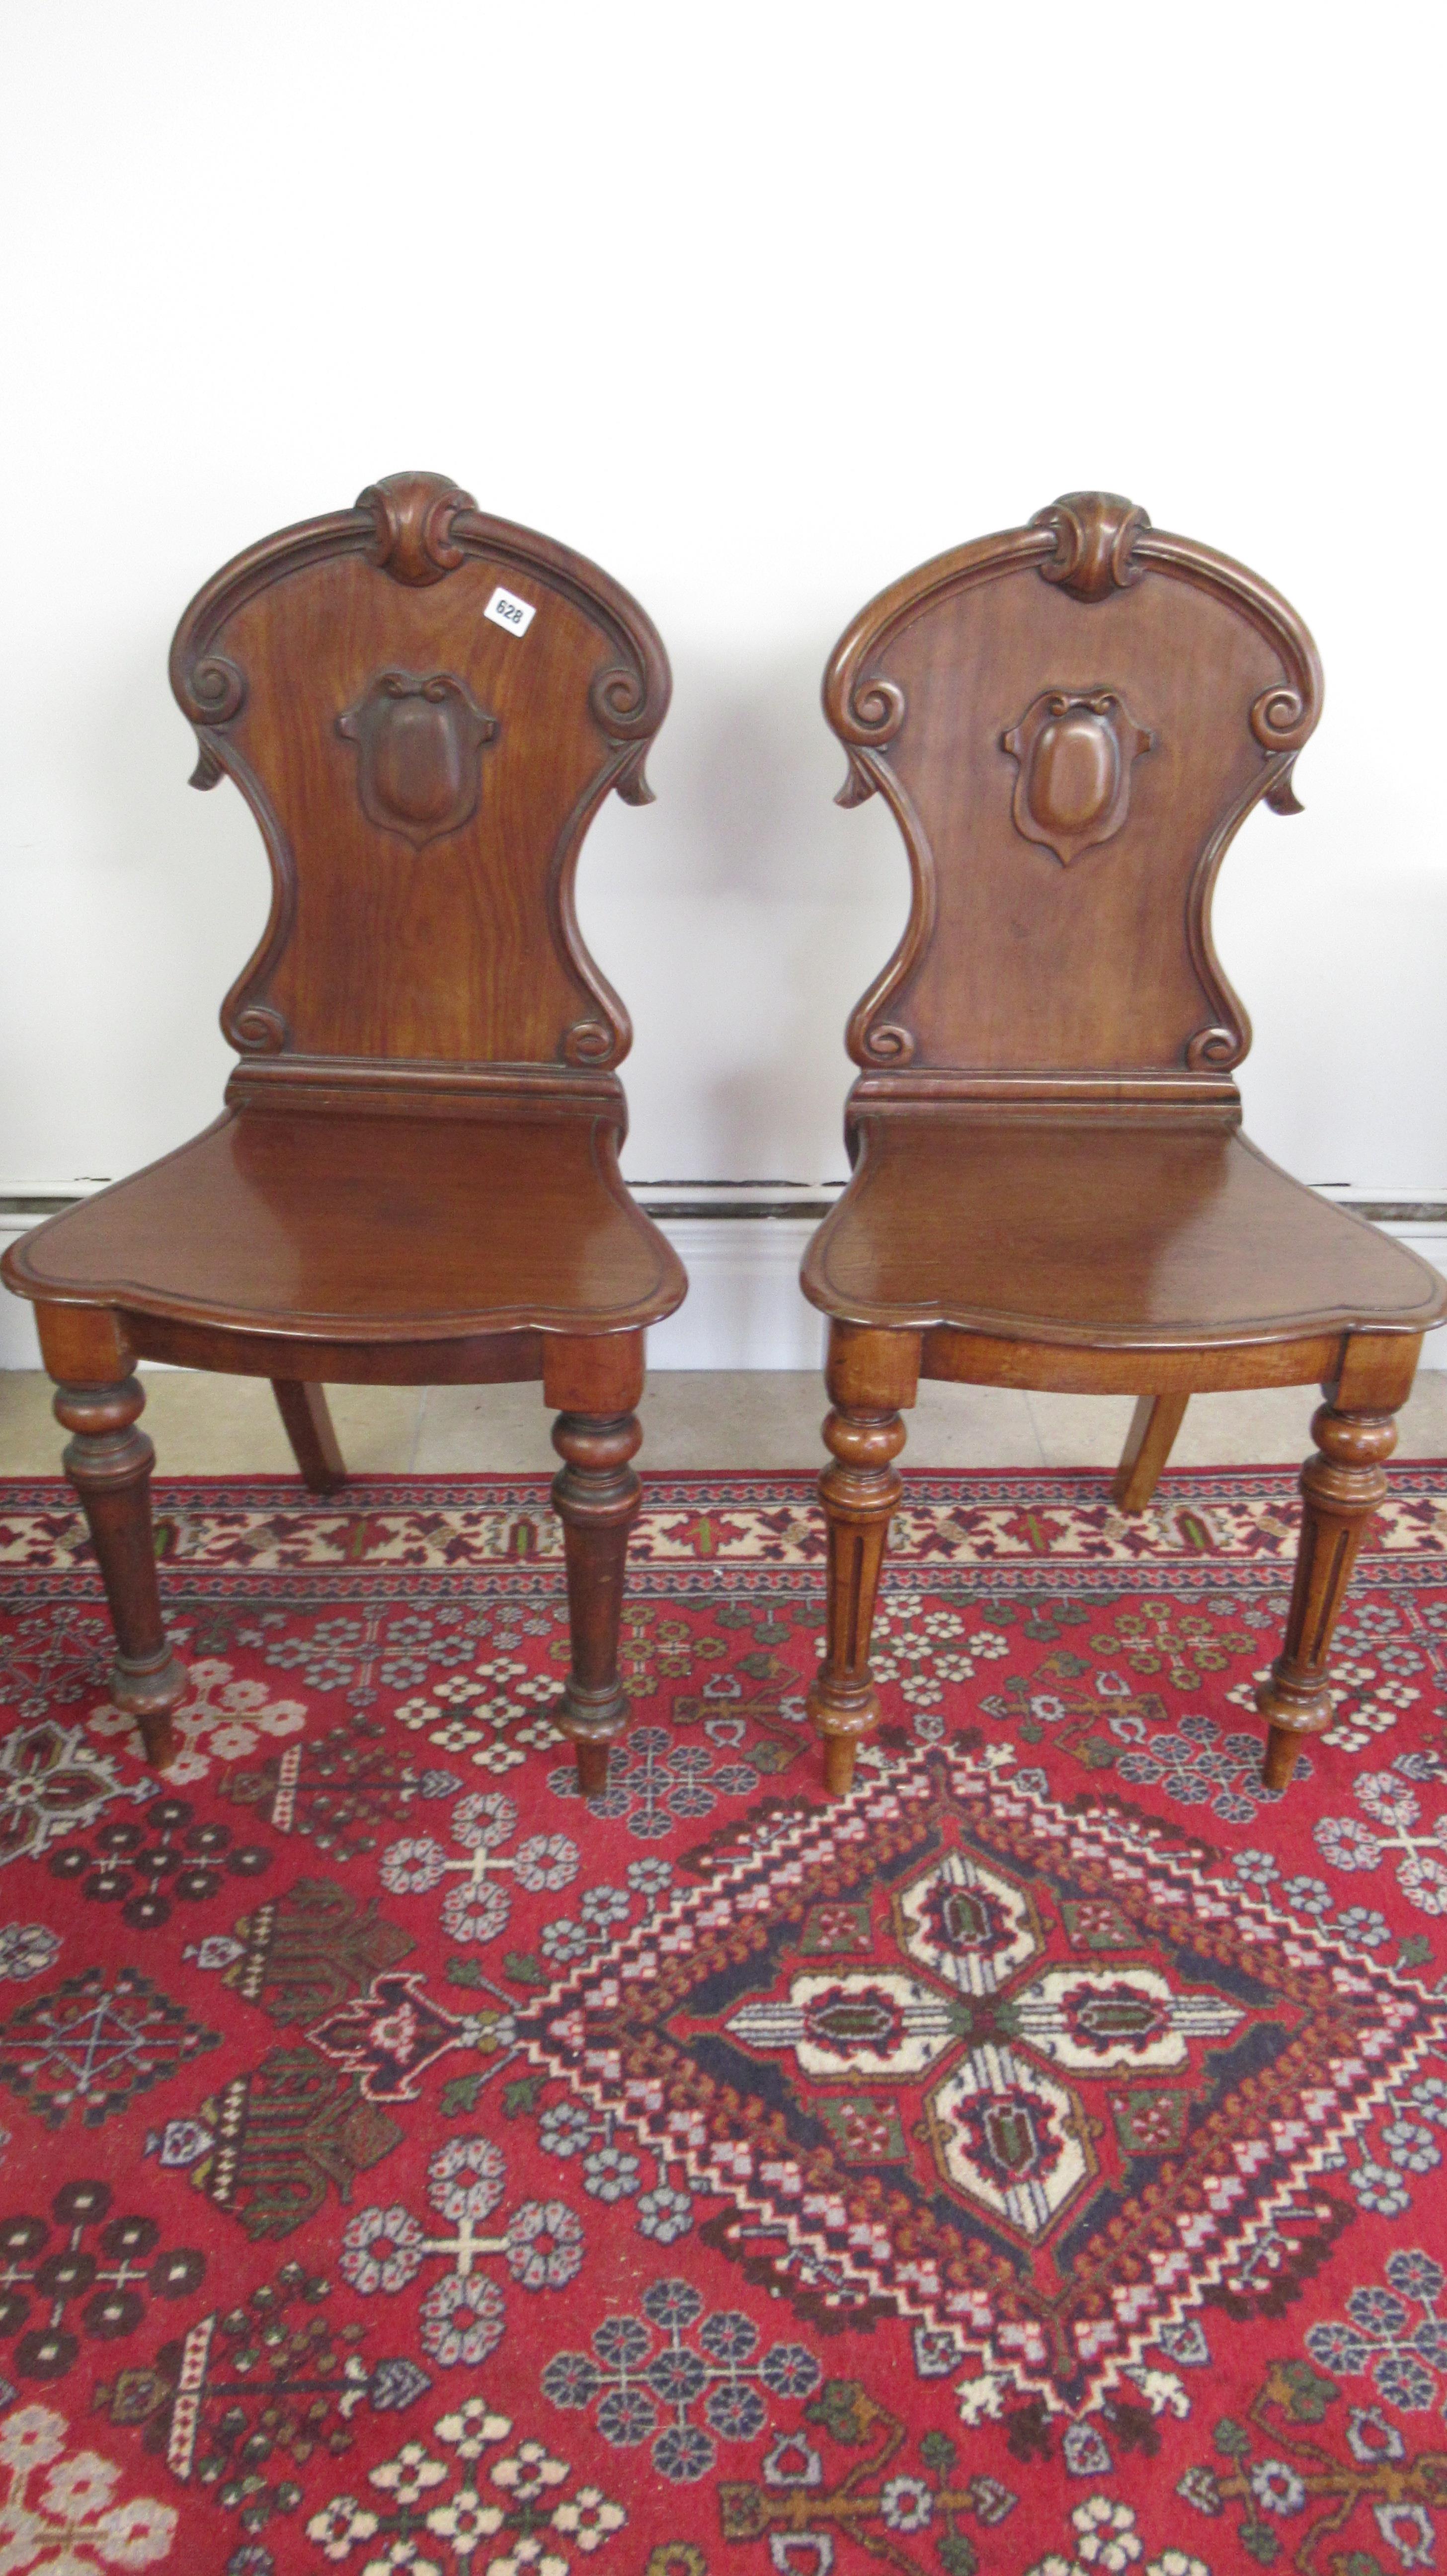 Two 19th century hall chairs, one with turned legs and one with reeded legs